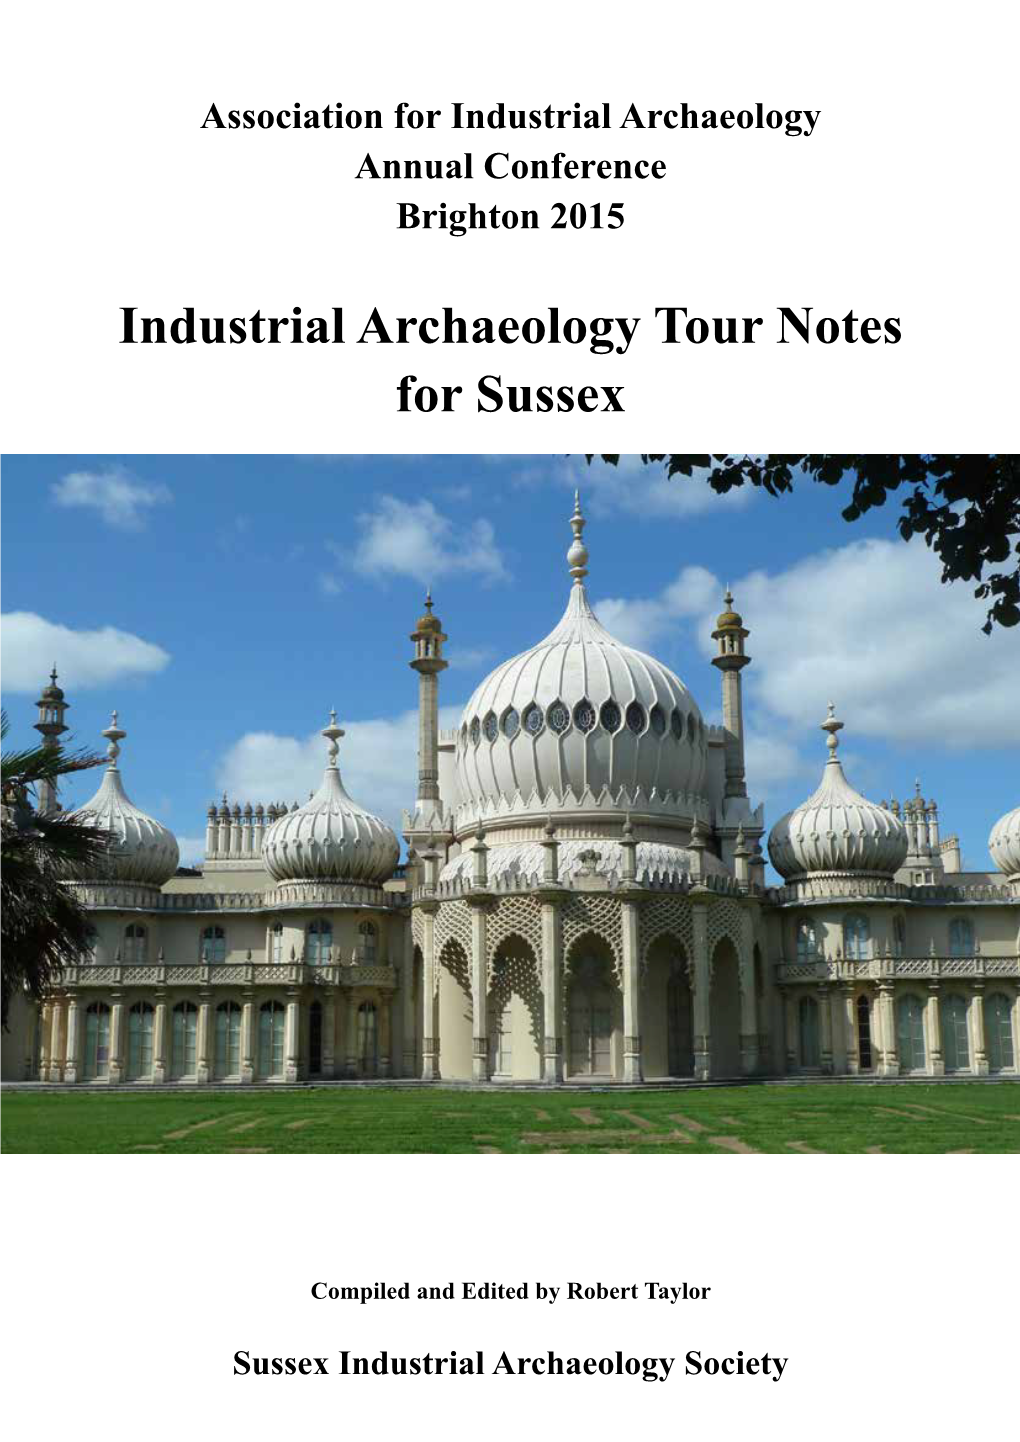 Industrial Archaeology Tour Notes for Sussex